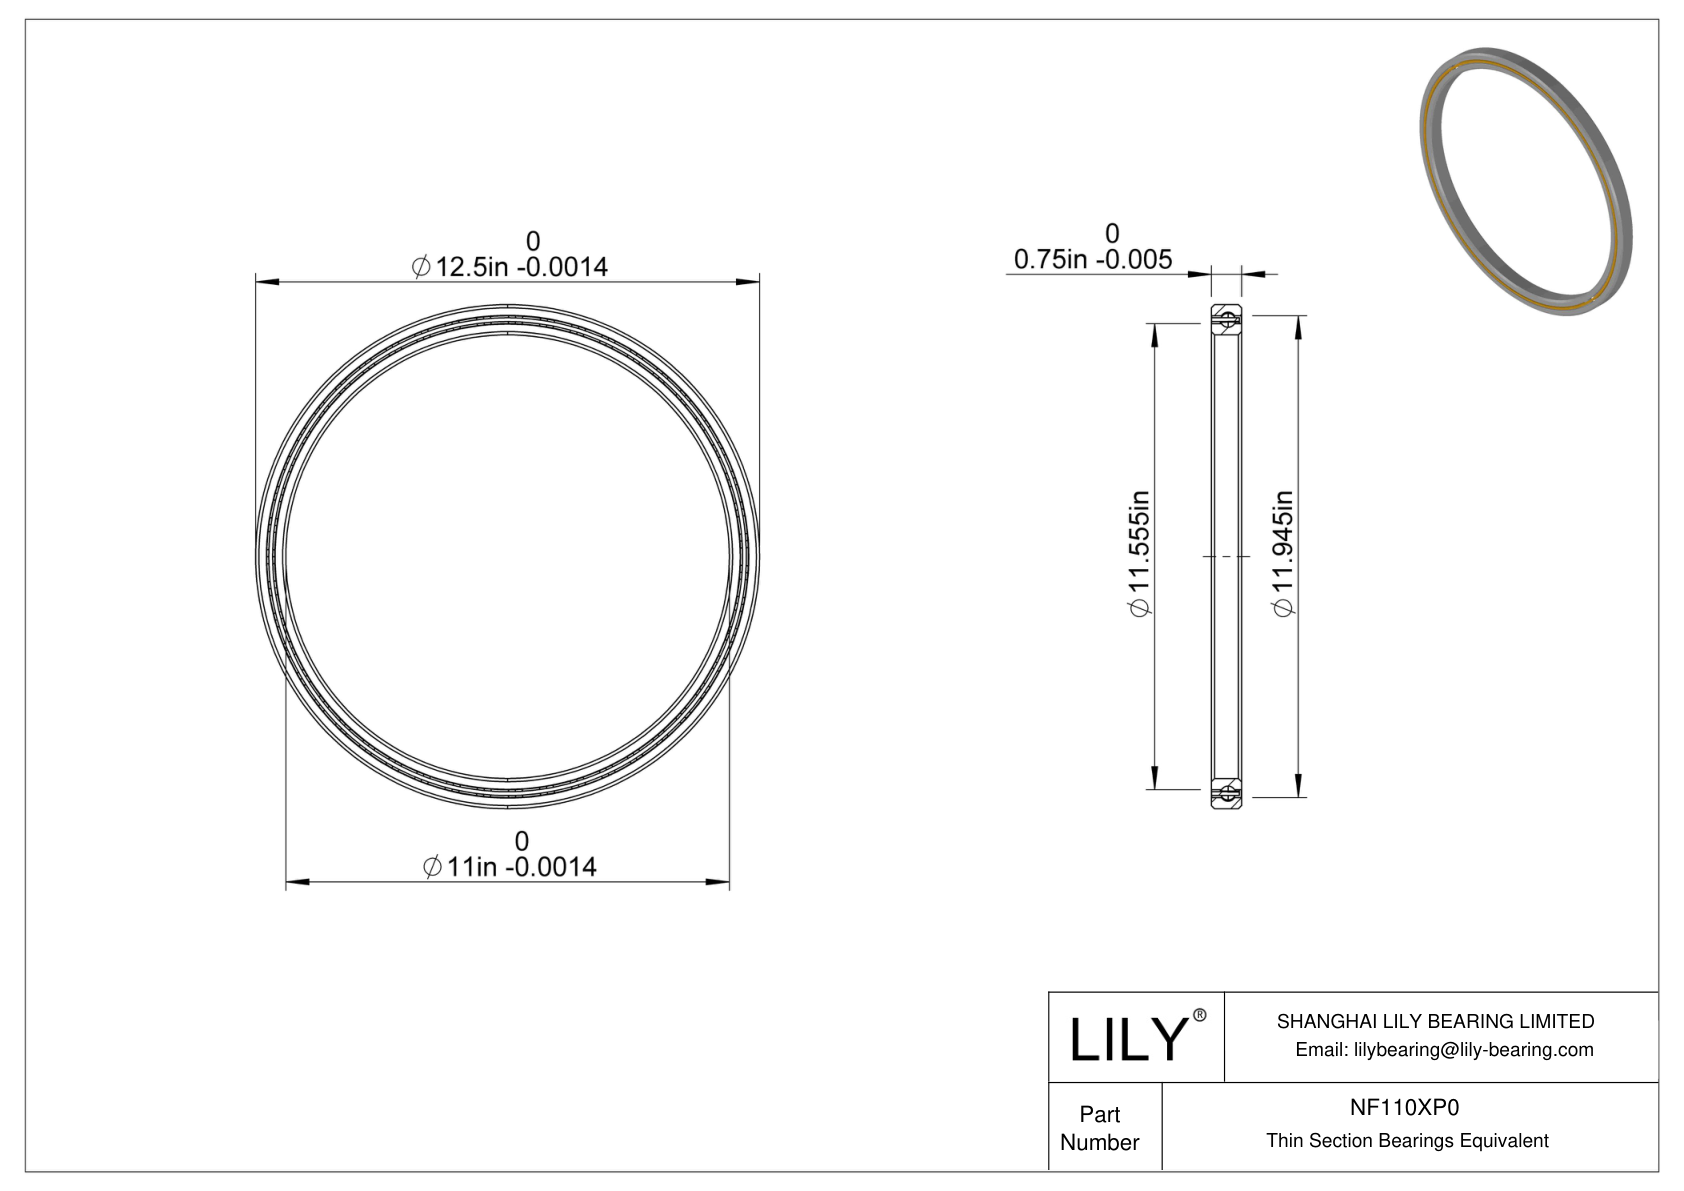 NF110XP0 Constant Section (CS) Bearings cad drawing